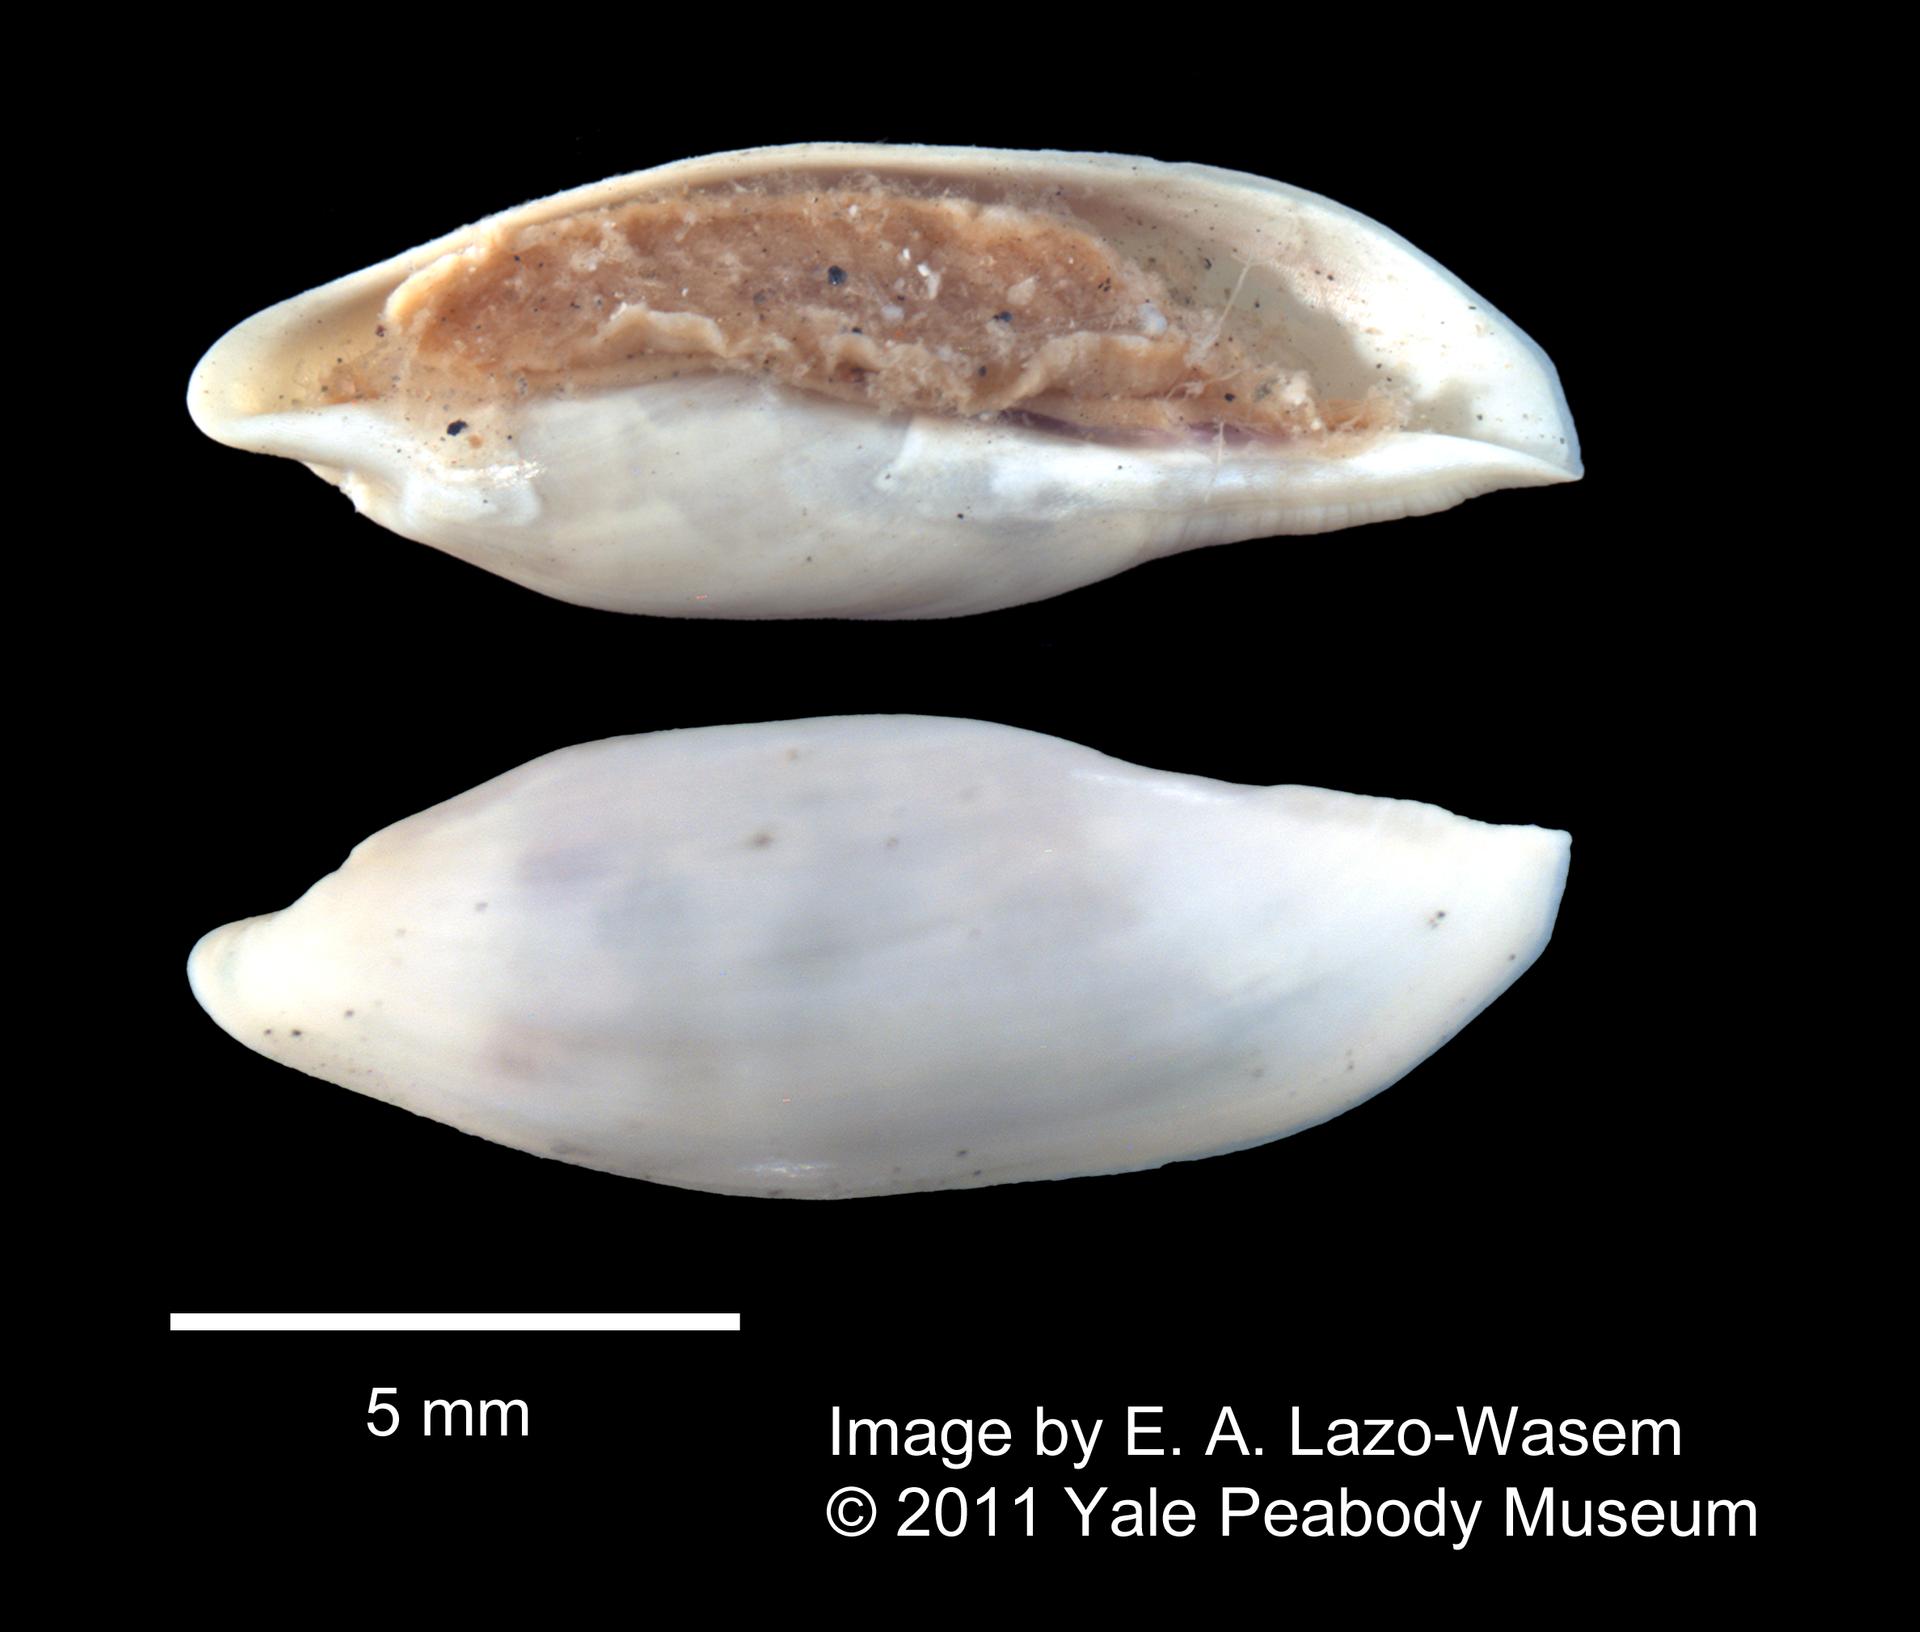 To Yale Peabody Museum of Natural History (YPM IZ 051407)